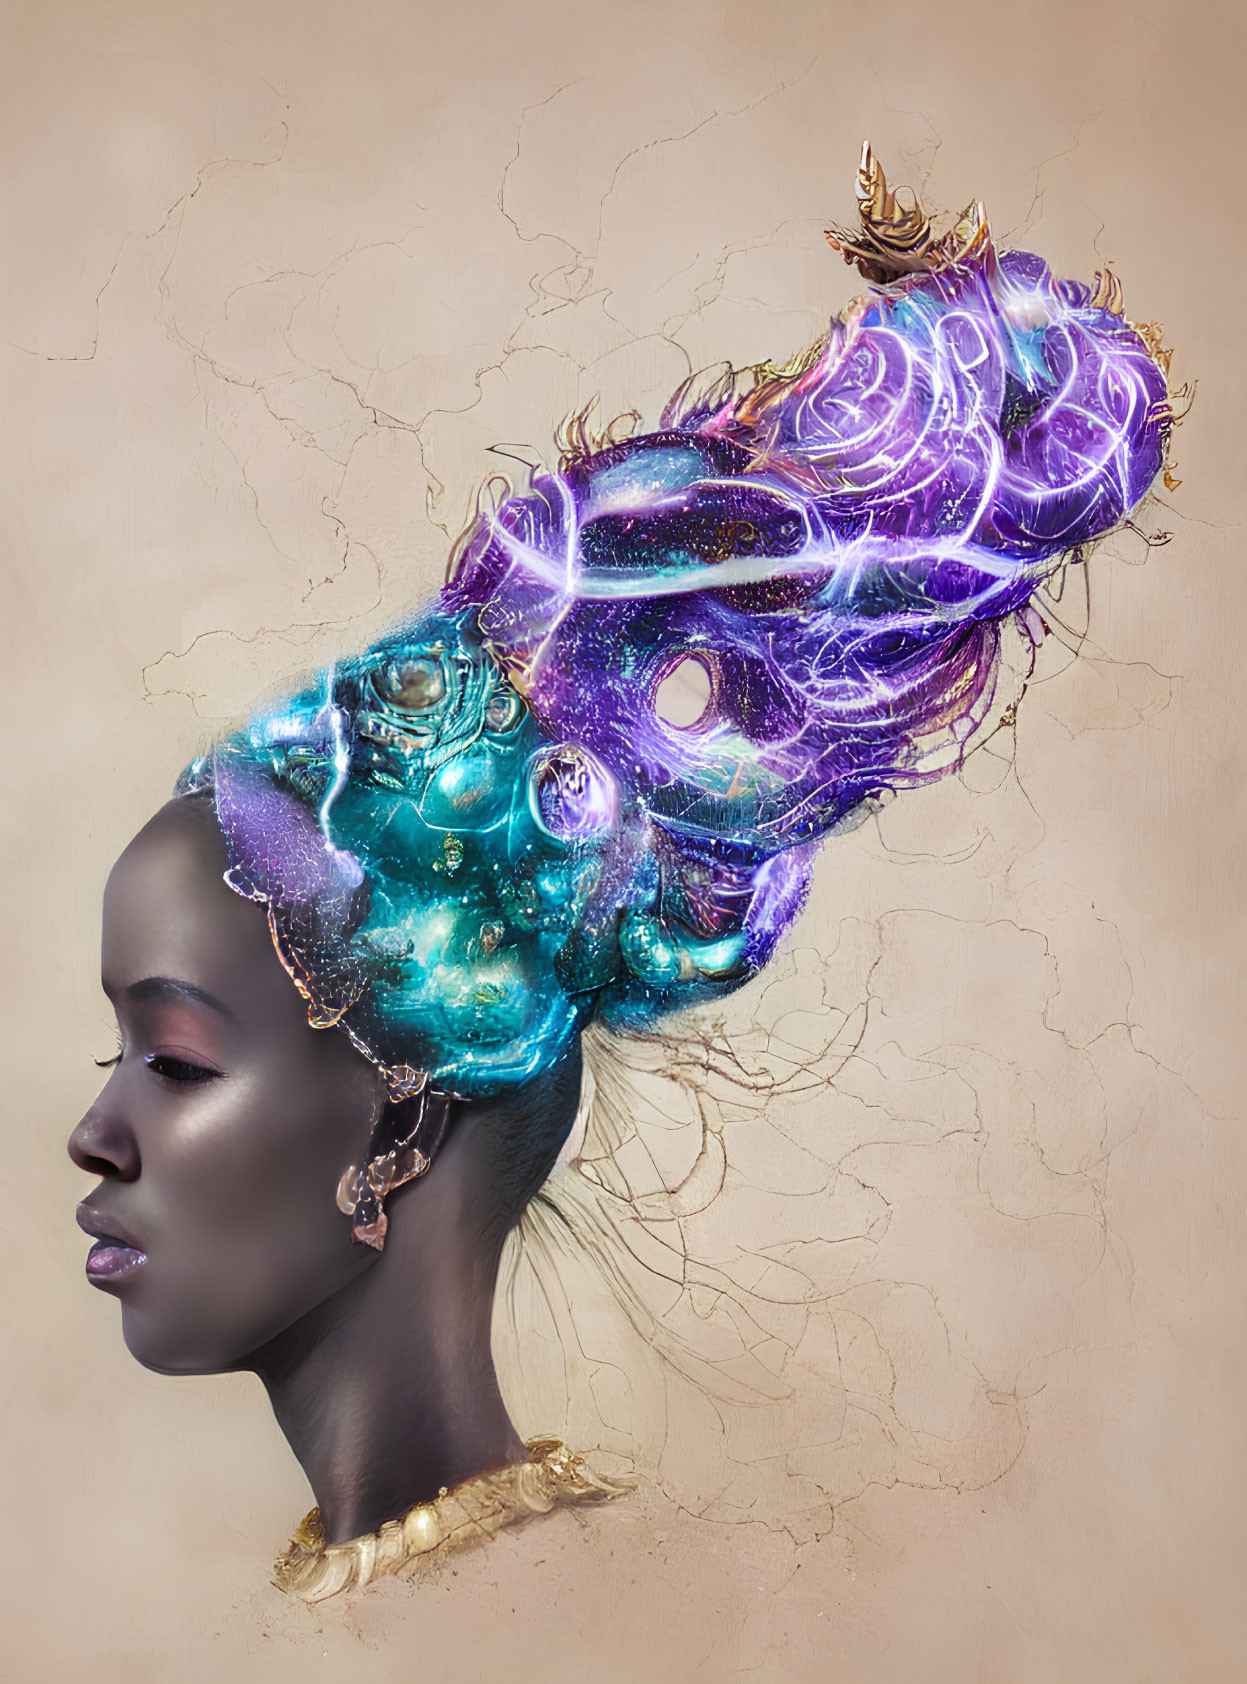 Cosmic-themed woman profile portrait in vivid purple and blue hues